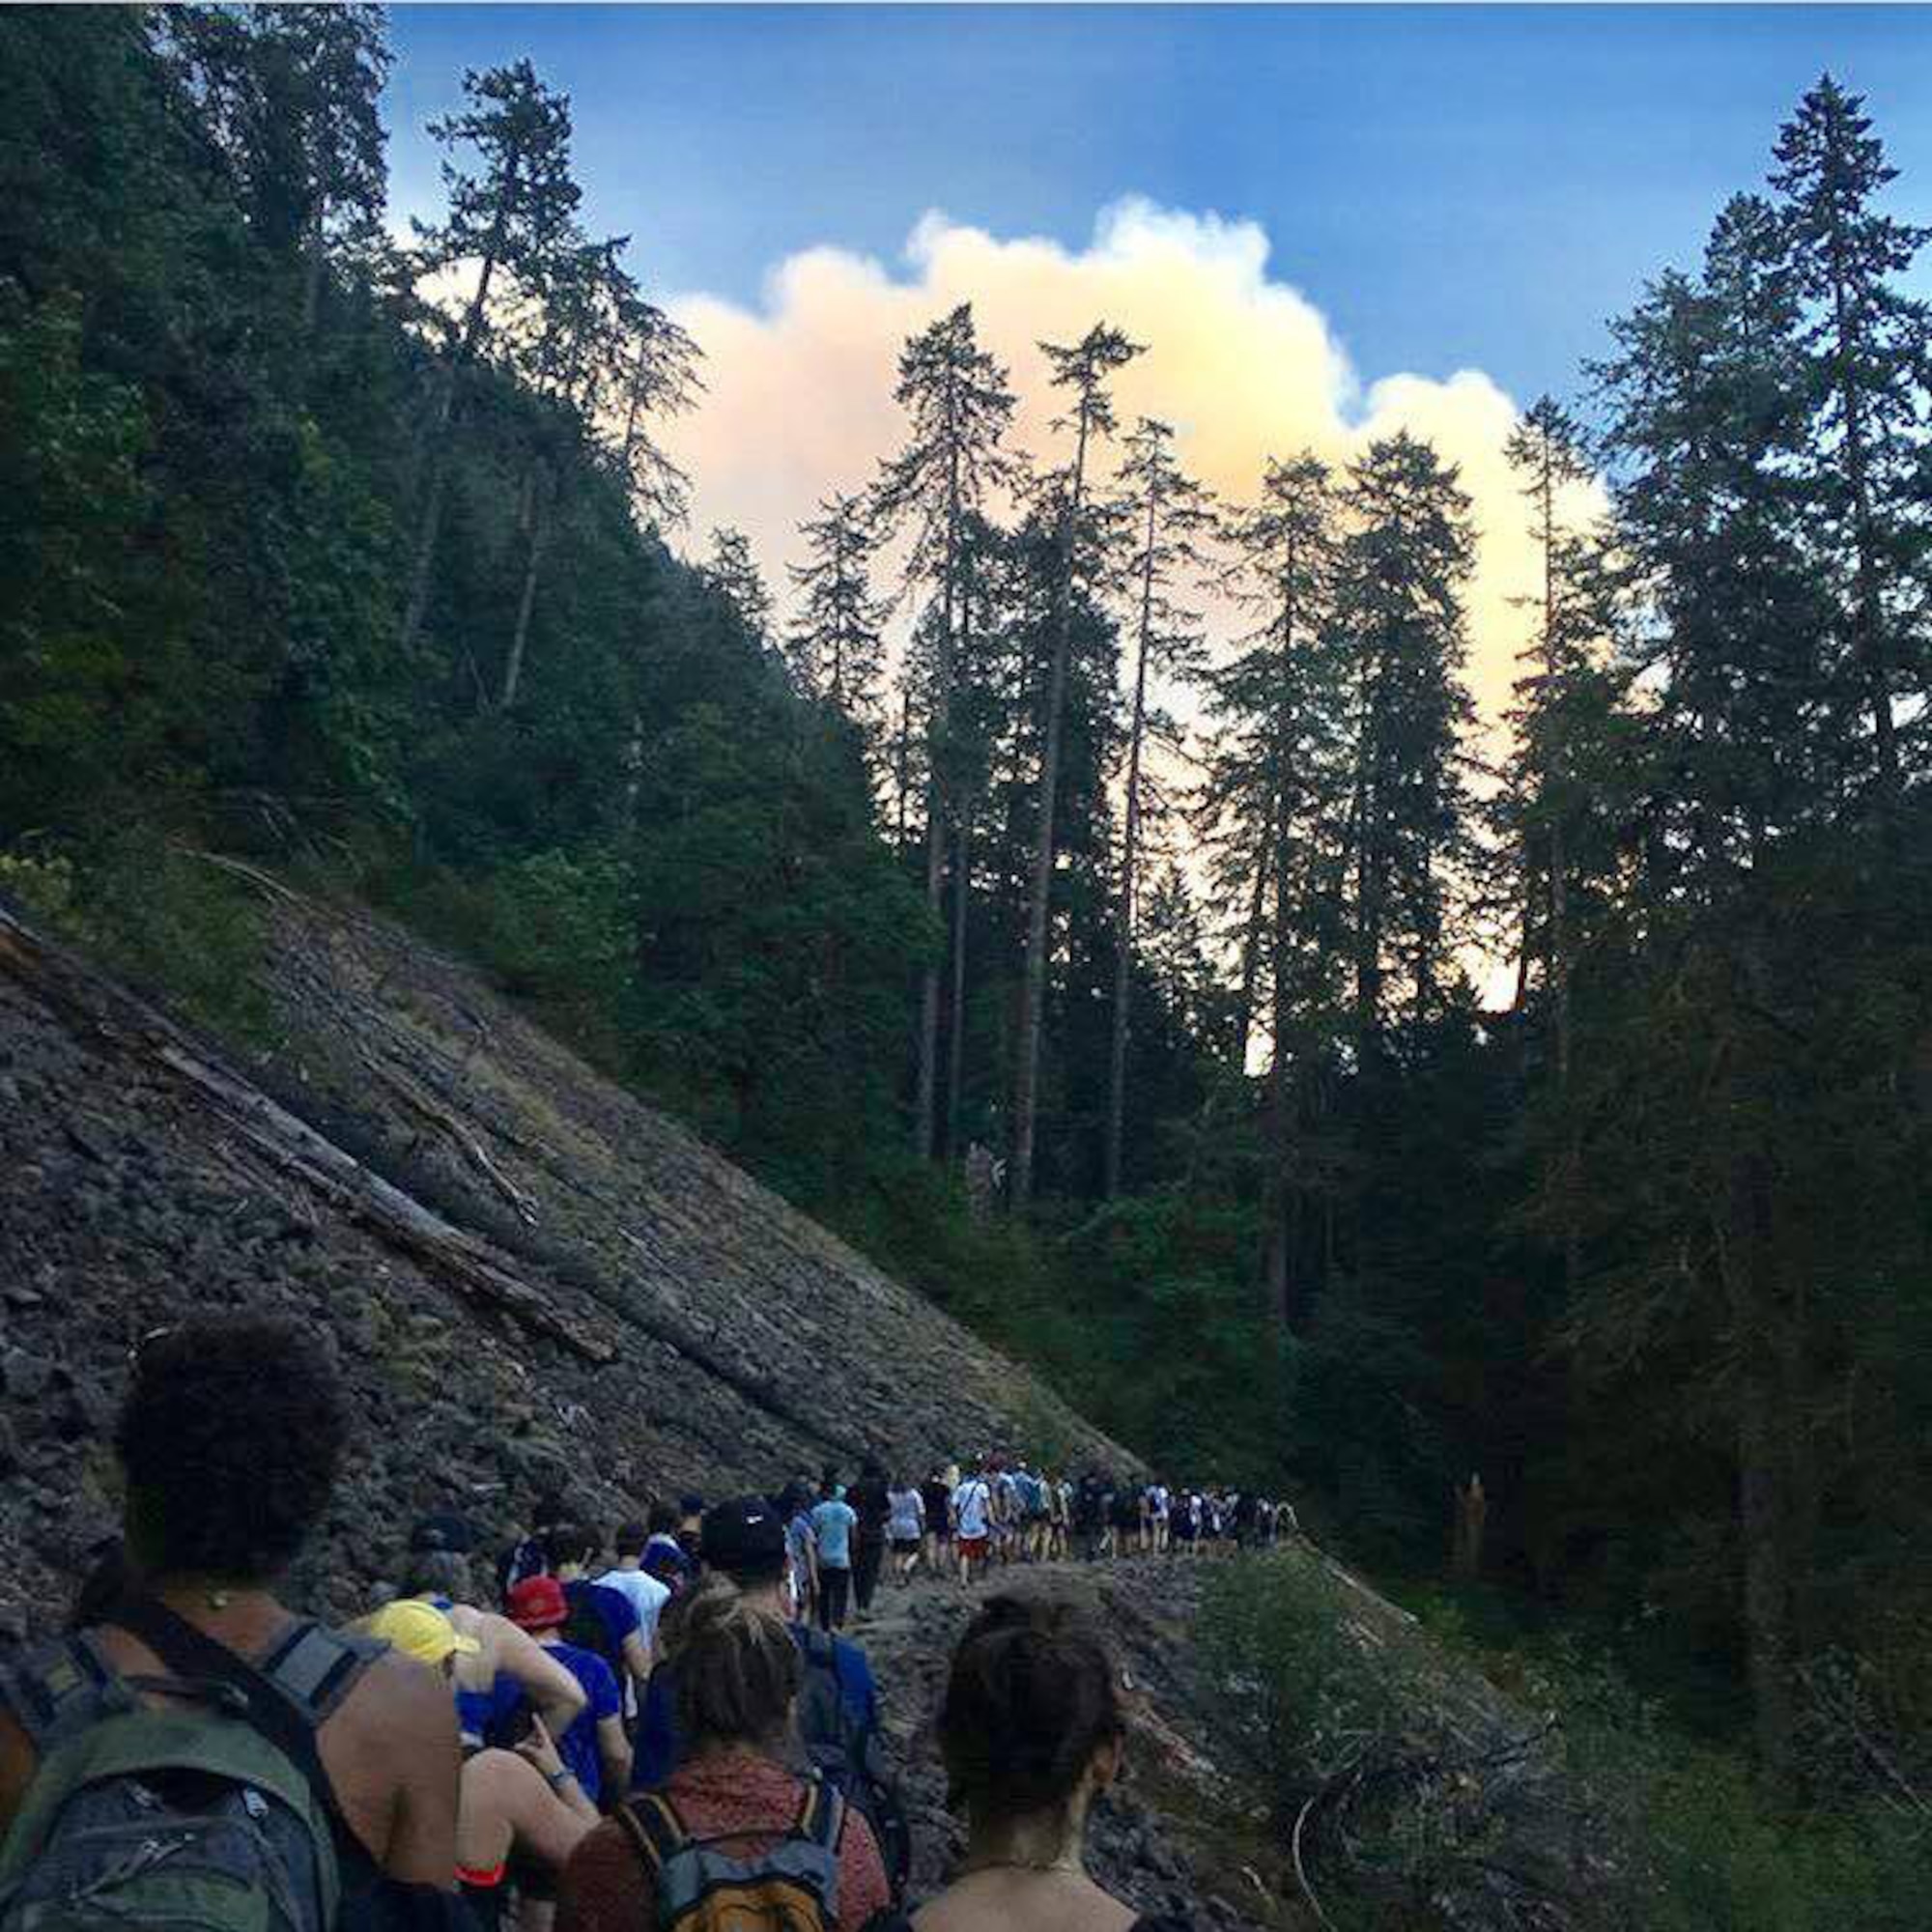 Hikers head away from the Eagle Creek Trail toward the Indian Creek Fire plume in the Columbia River Gorge near Portland, Ore., on Sept. 2, 2017.  Tech. Sgt. Robert Dones, 349th Medical Squadron surgical technician, helped guide the group safely out of the fire. (U.S. Air Force courtesy photo provided by Sarah Carlin Ames)